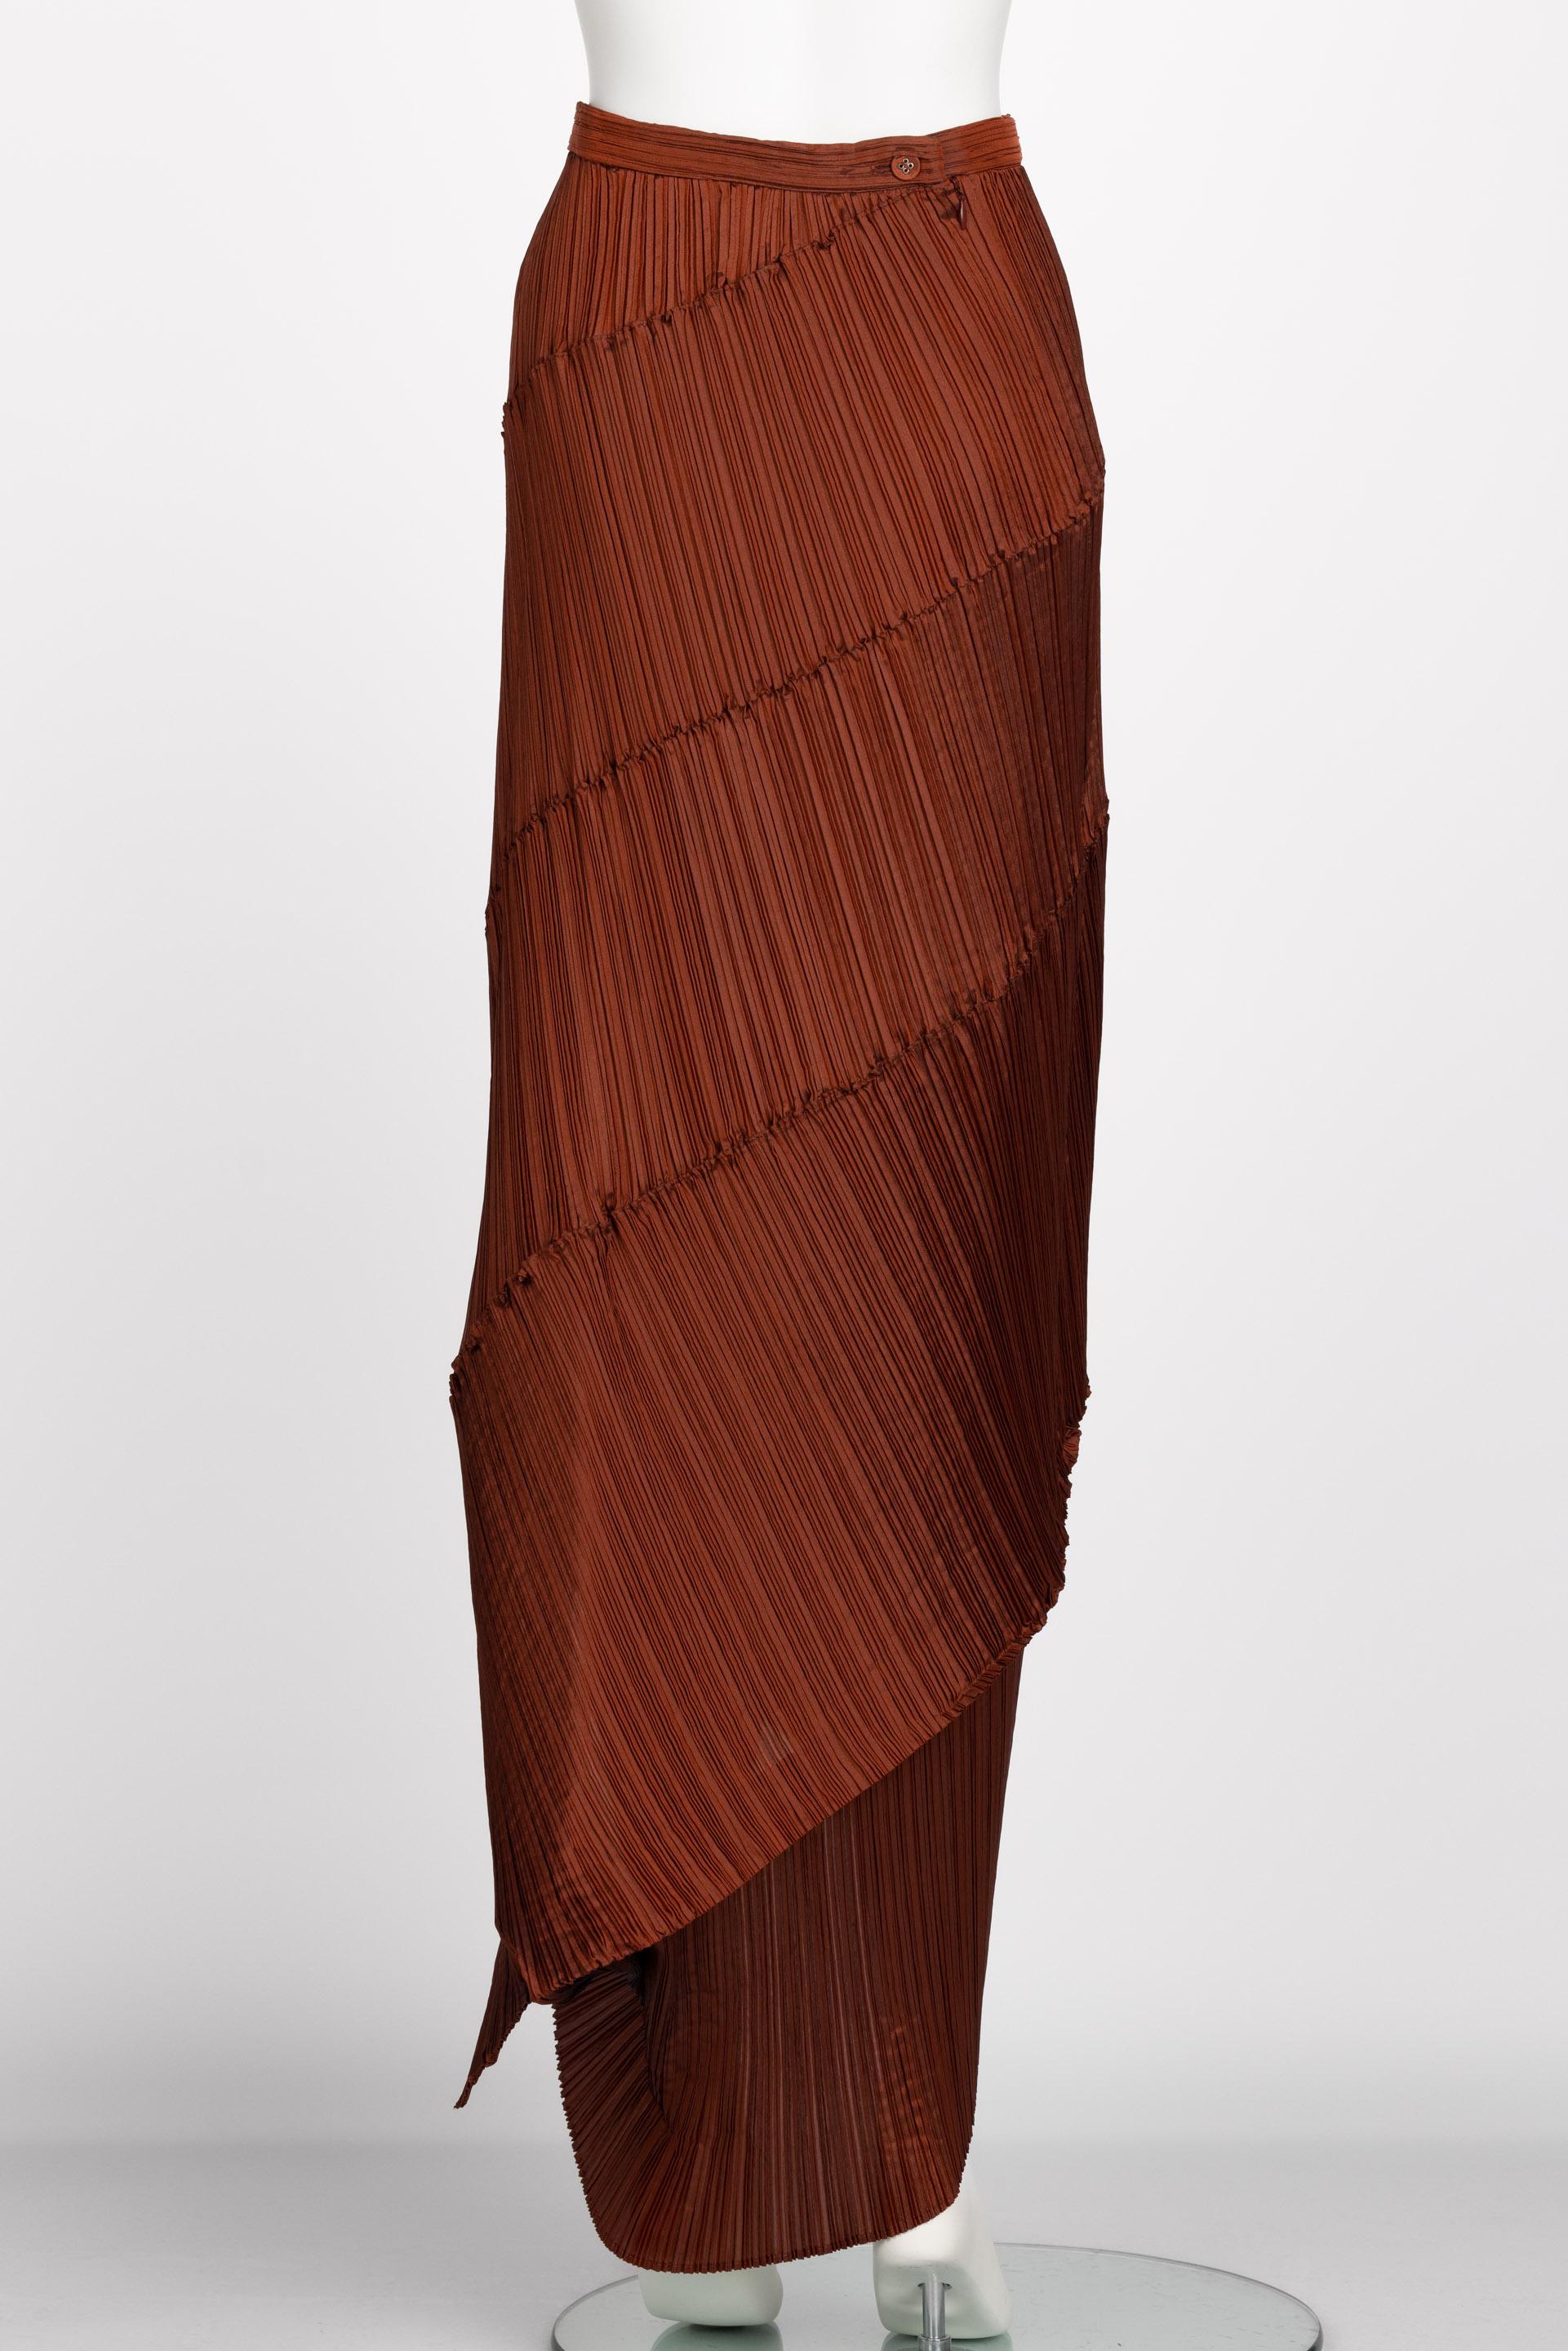 Brown Issey Miyake Copper  Pleated Spiral Skirt, 1990S For Sale